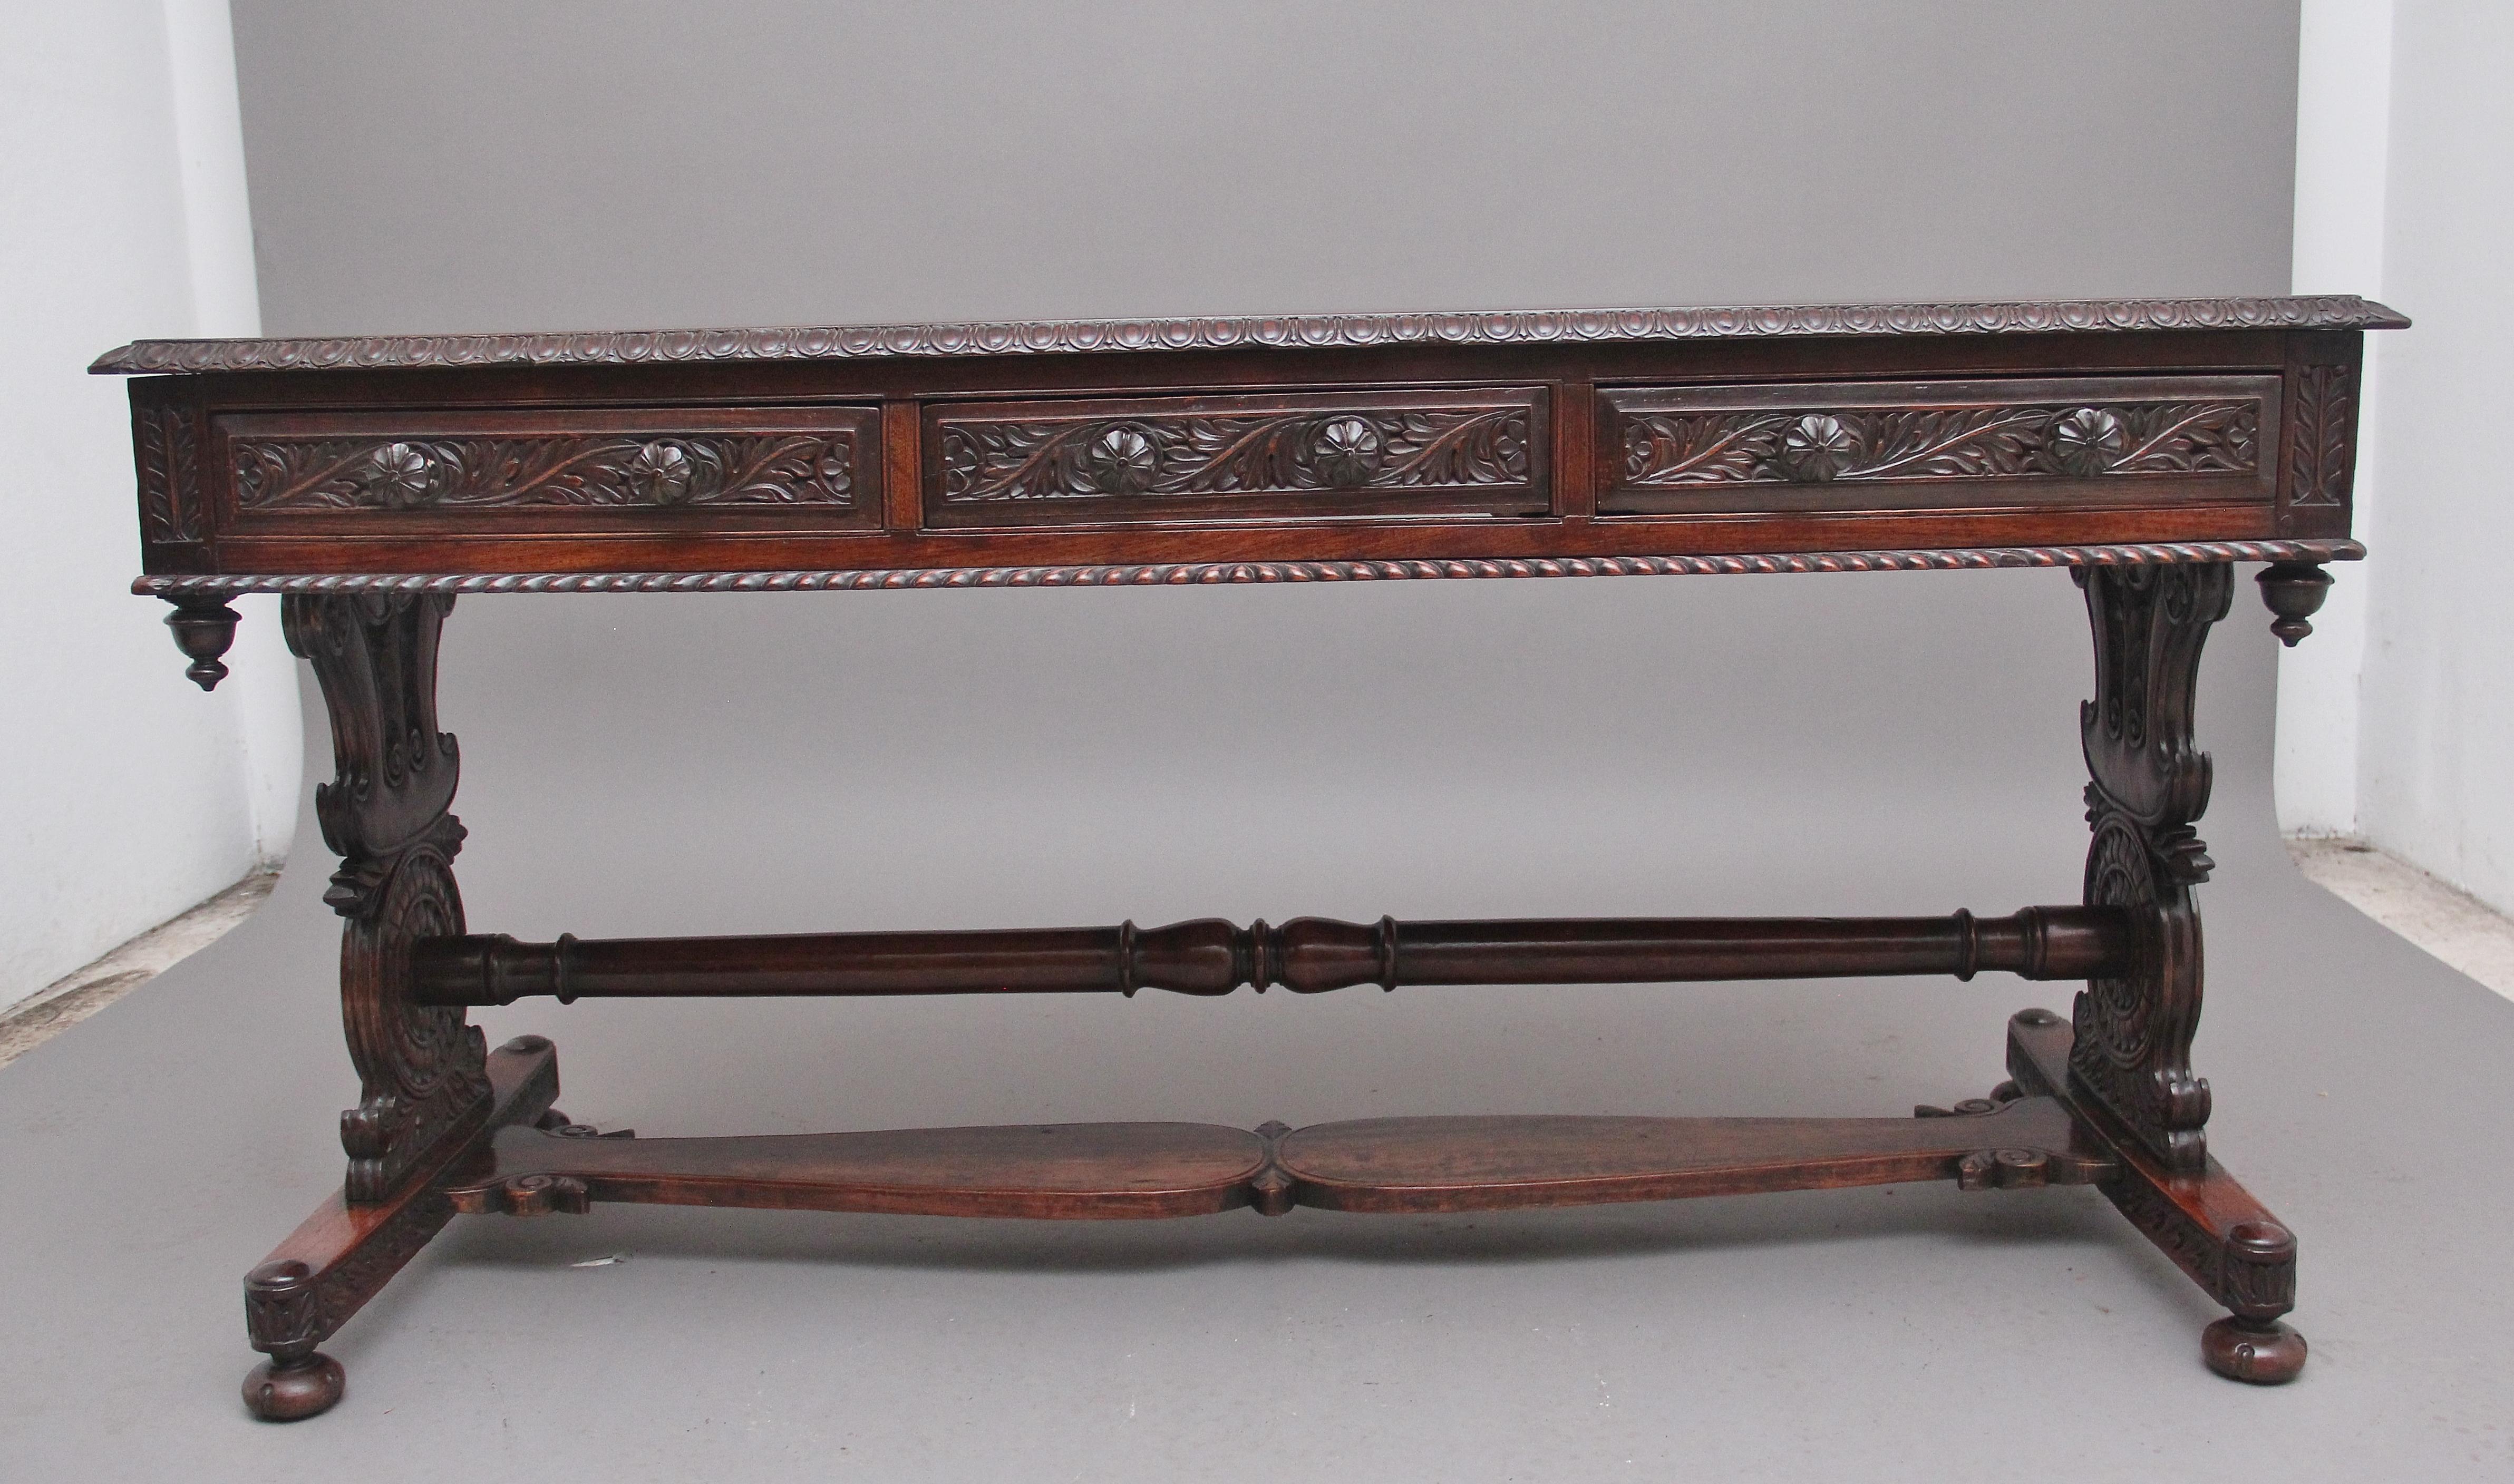 Early 19th Century Anglo-Indian teak serving / consul table, having a nice figured top with a decorative carved gadrooned edge, three frieze drawers below with the original carved wooden knob handles, carved floral decoration on the drawer fronts